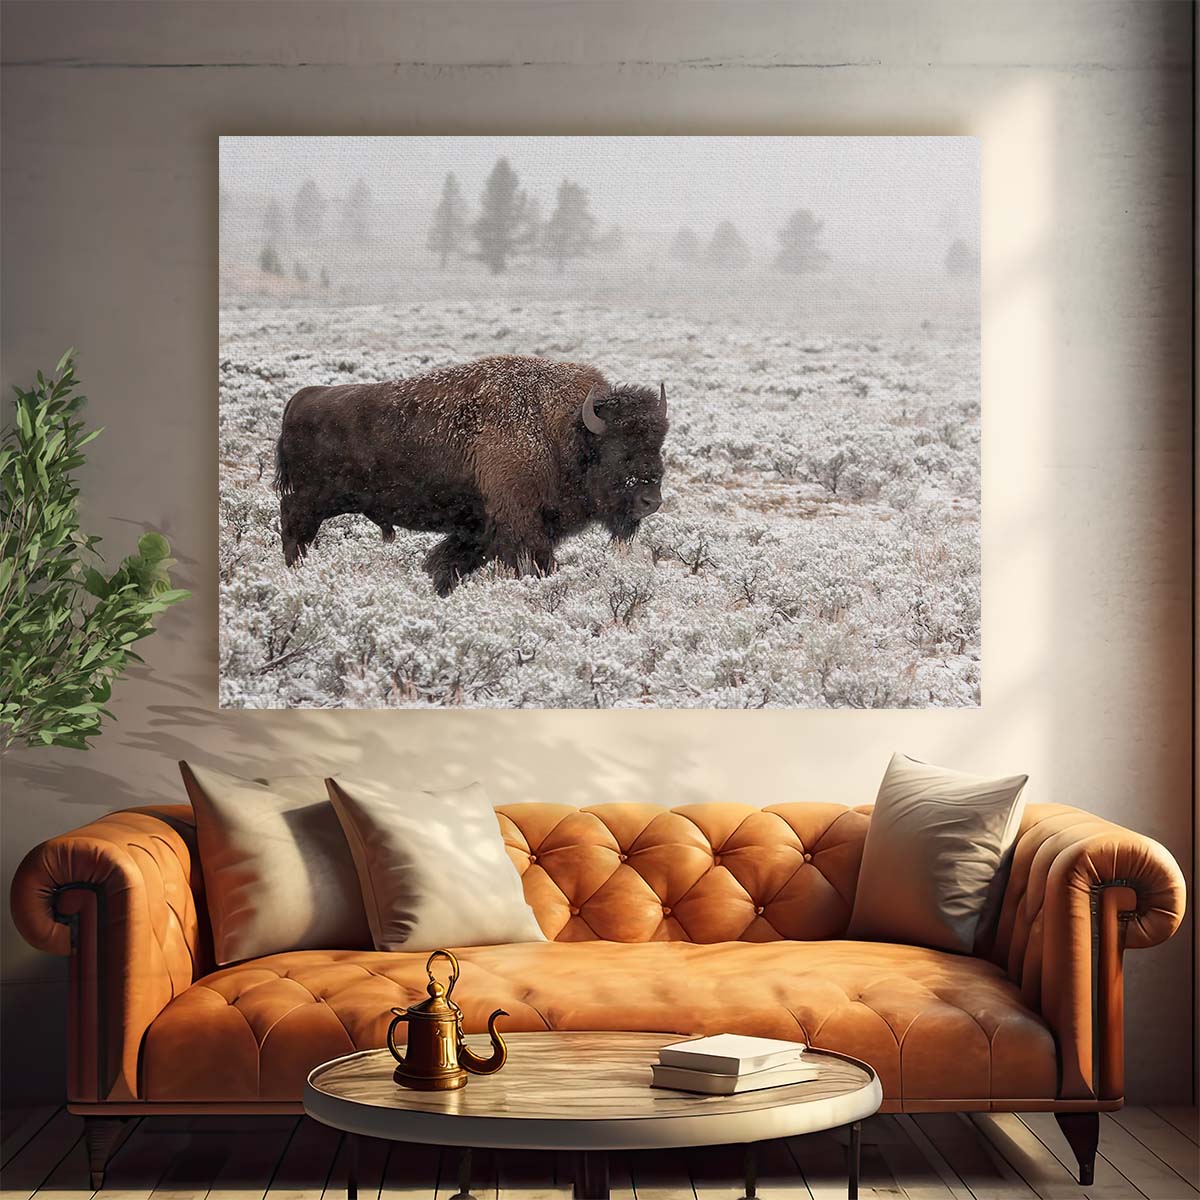 Majestic Yellowstone Bison in Snowy Landscape Wall Art by Luxuriance Designs. Made in USA.